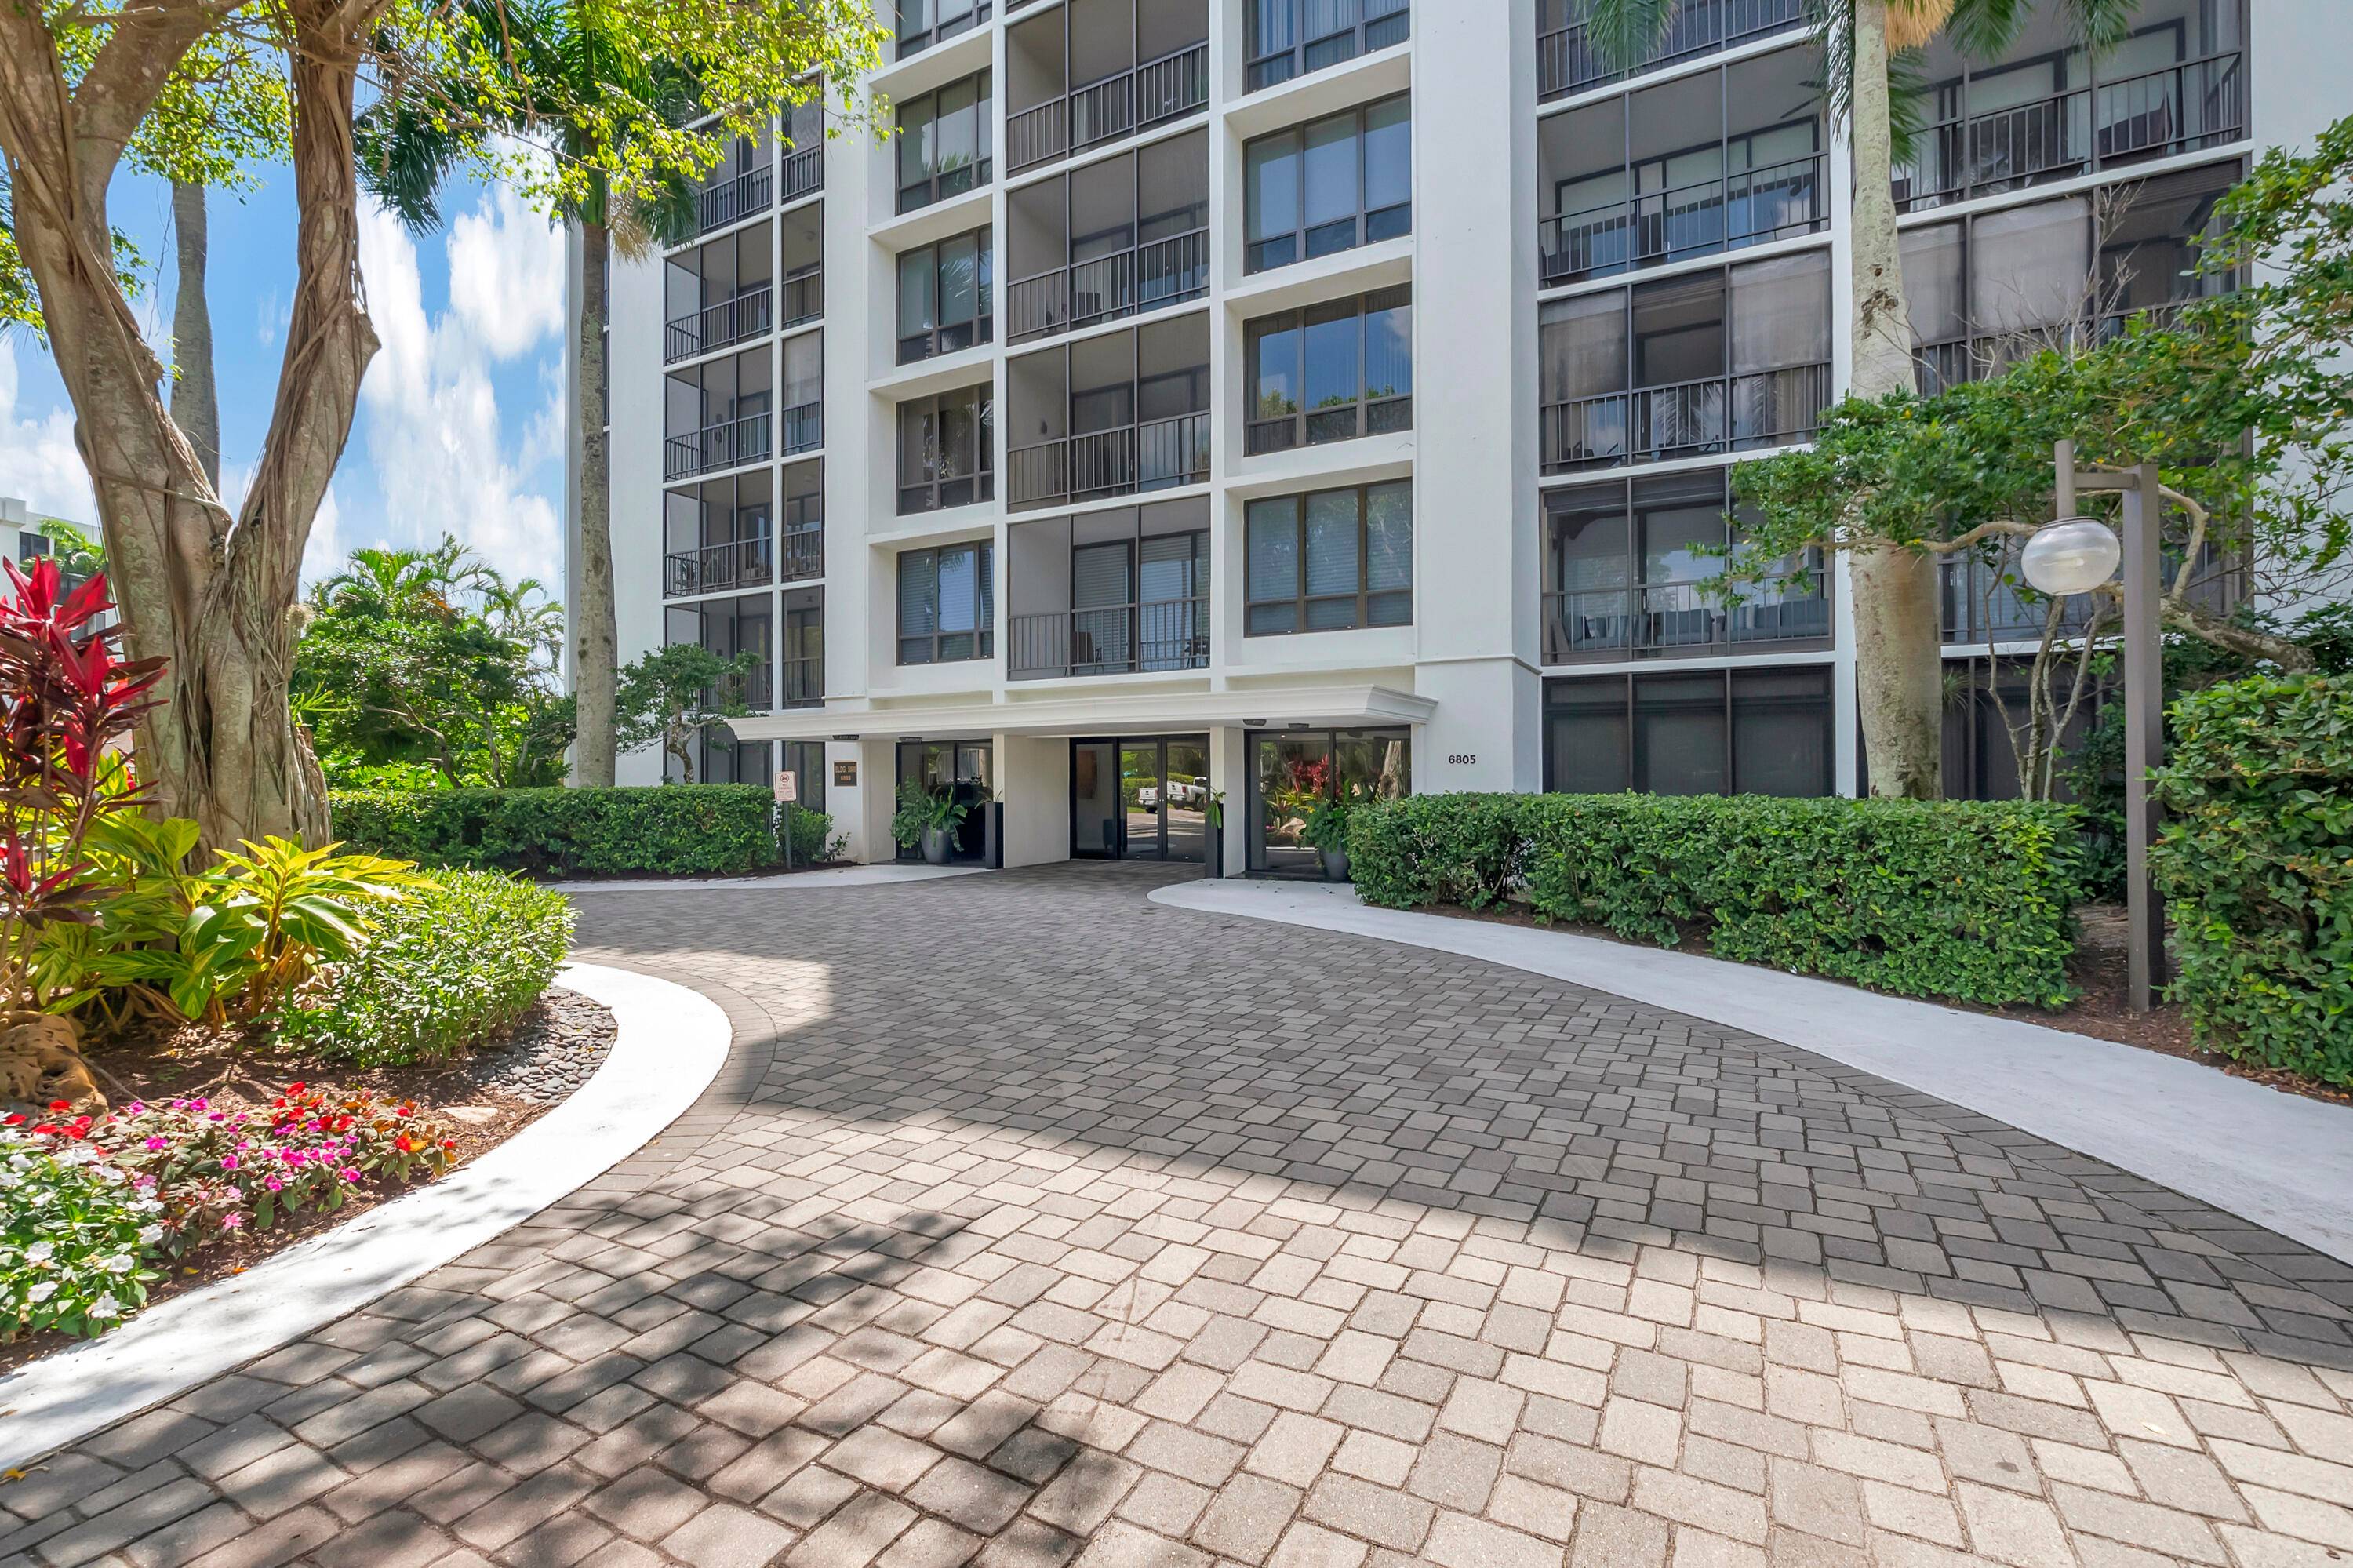 Beautifully renovated and fully updated ground floor condo with light and bright golf course views from every window.